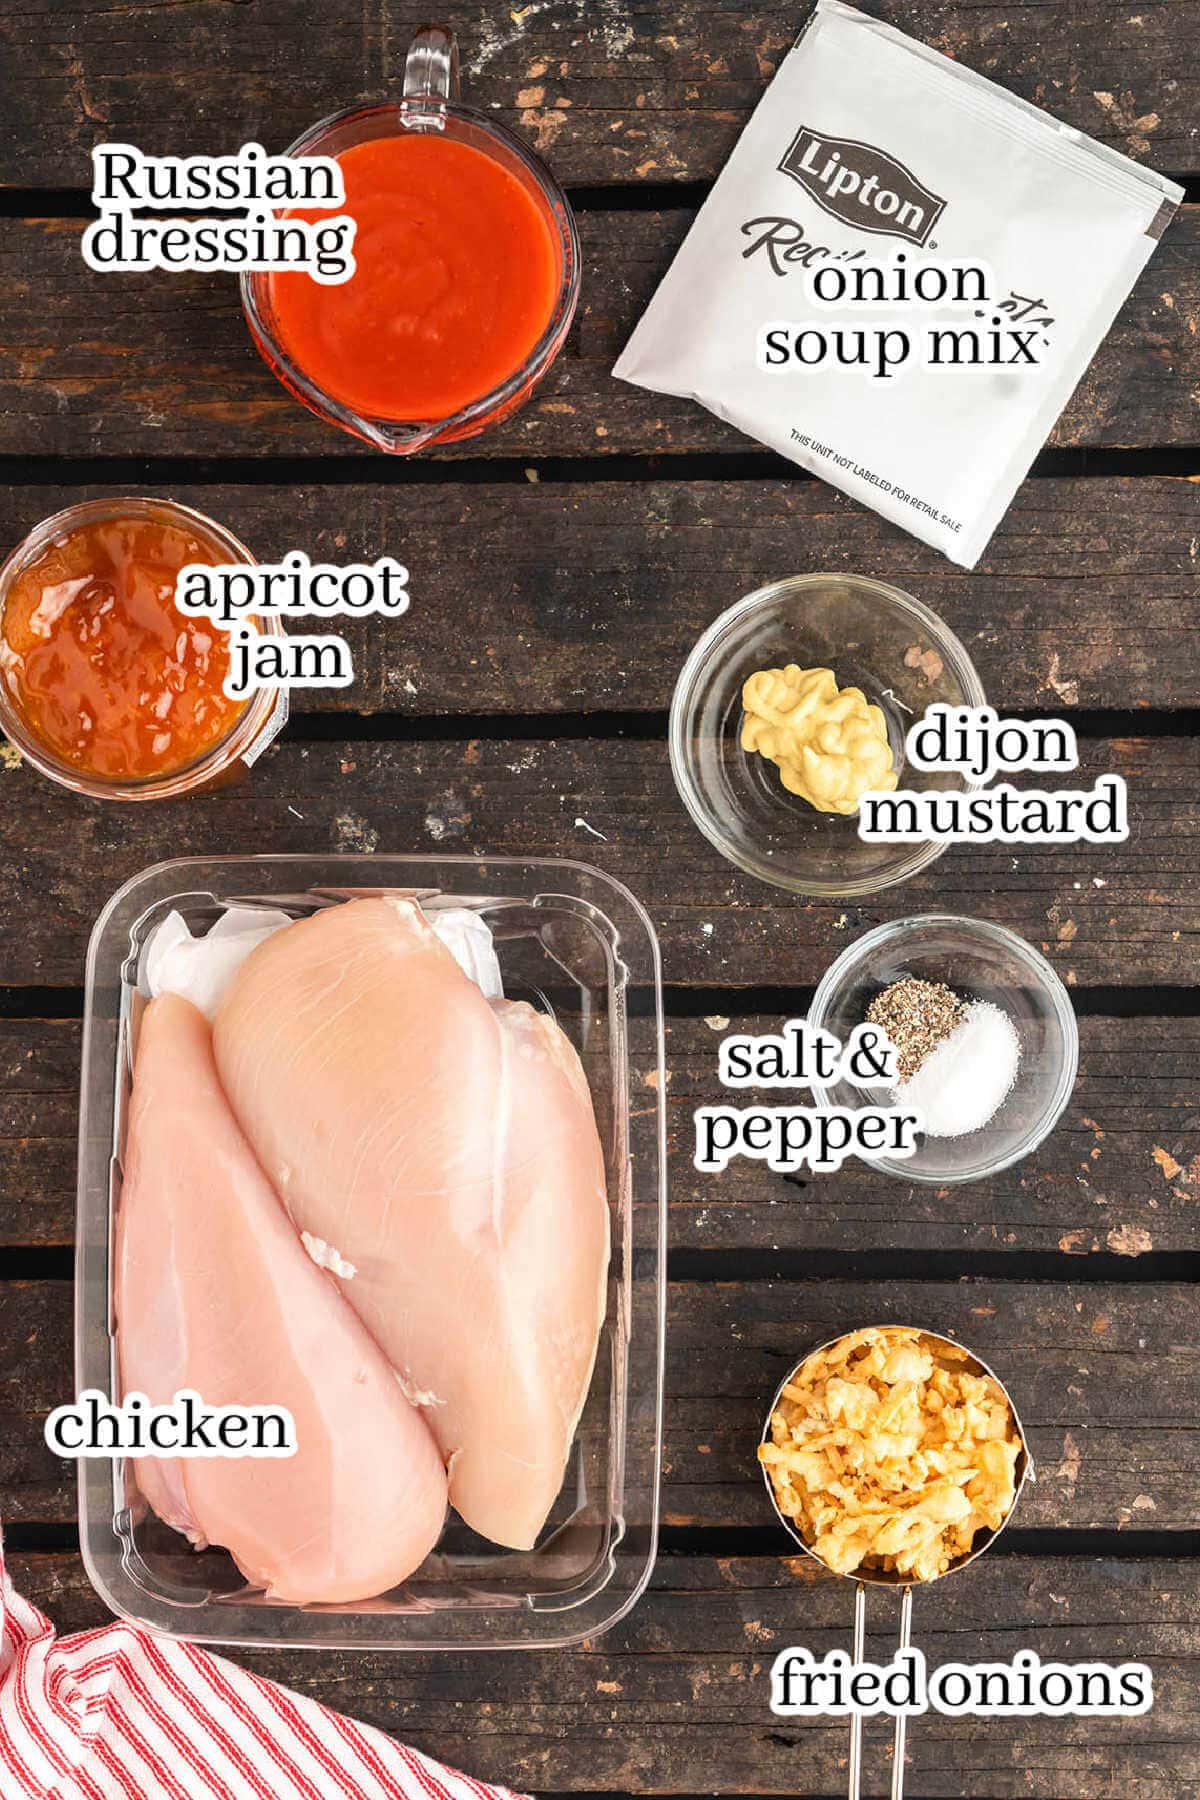 Ingredients to make casserole dish, with print overlay.